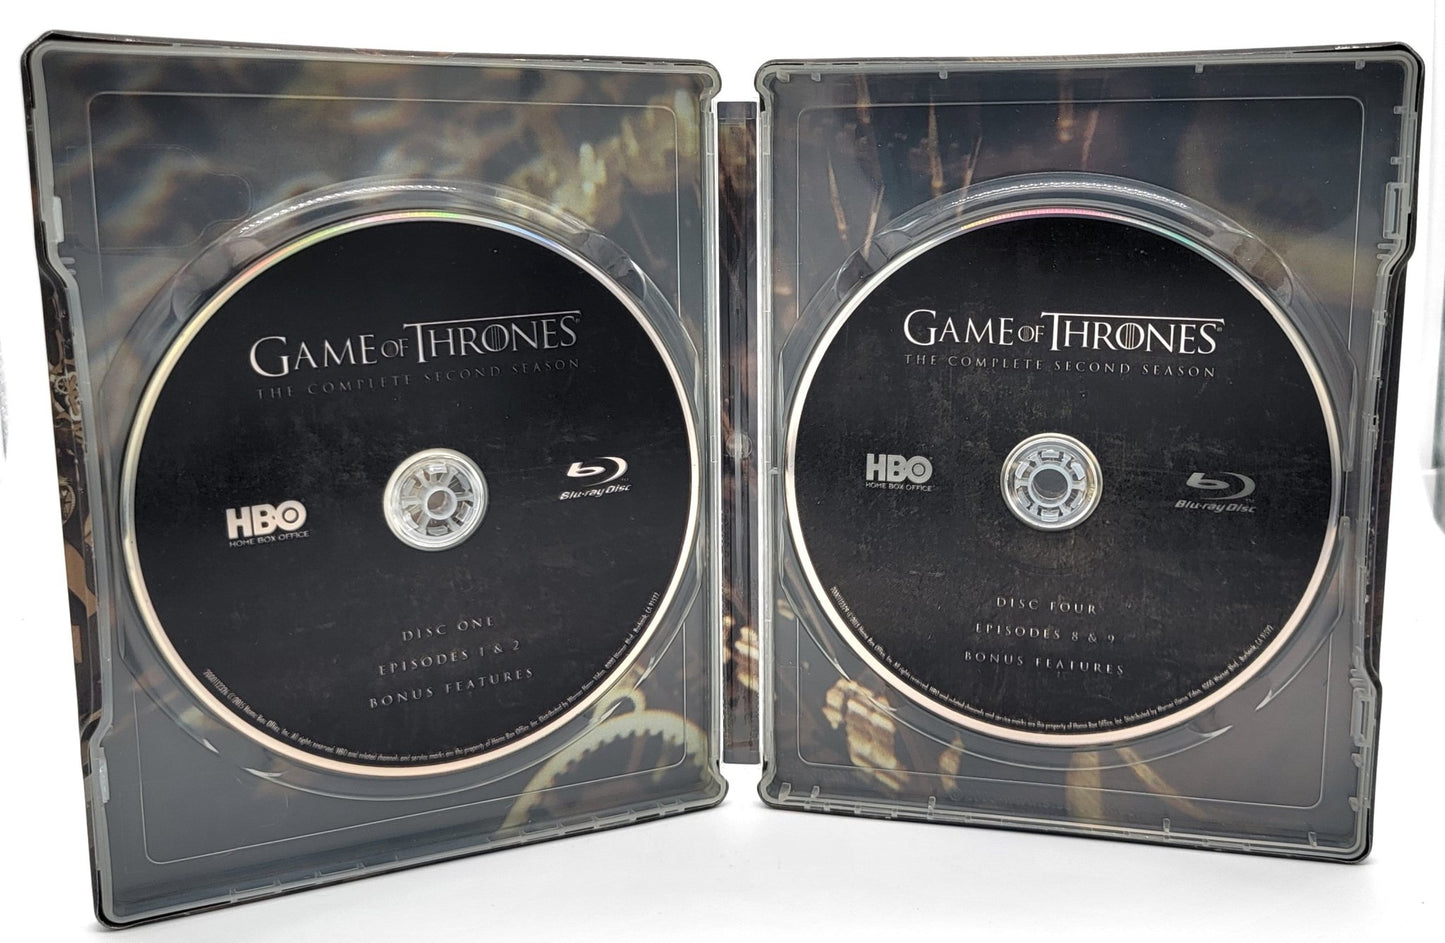 HBO Home Entertainment - Steel Book Game of Thrones - King's Landing - The Complete Second Season | Blu Ray 5 Disc Set - Limited Edition Collectors Tin - DVD - Steady Bunny Shop